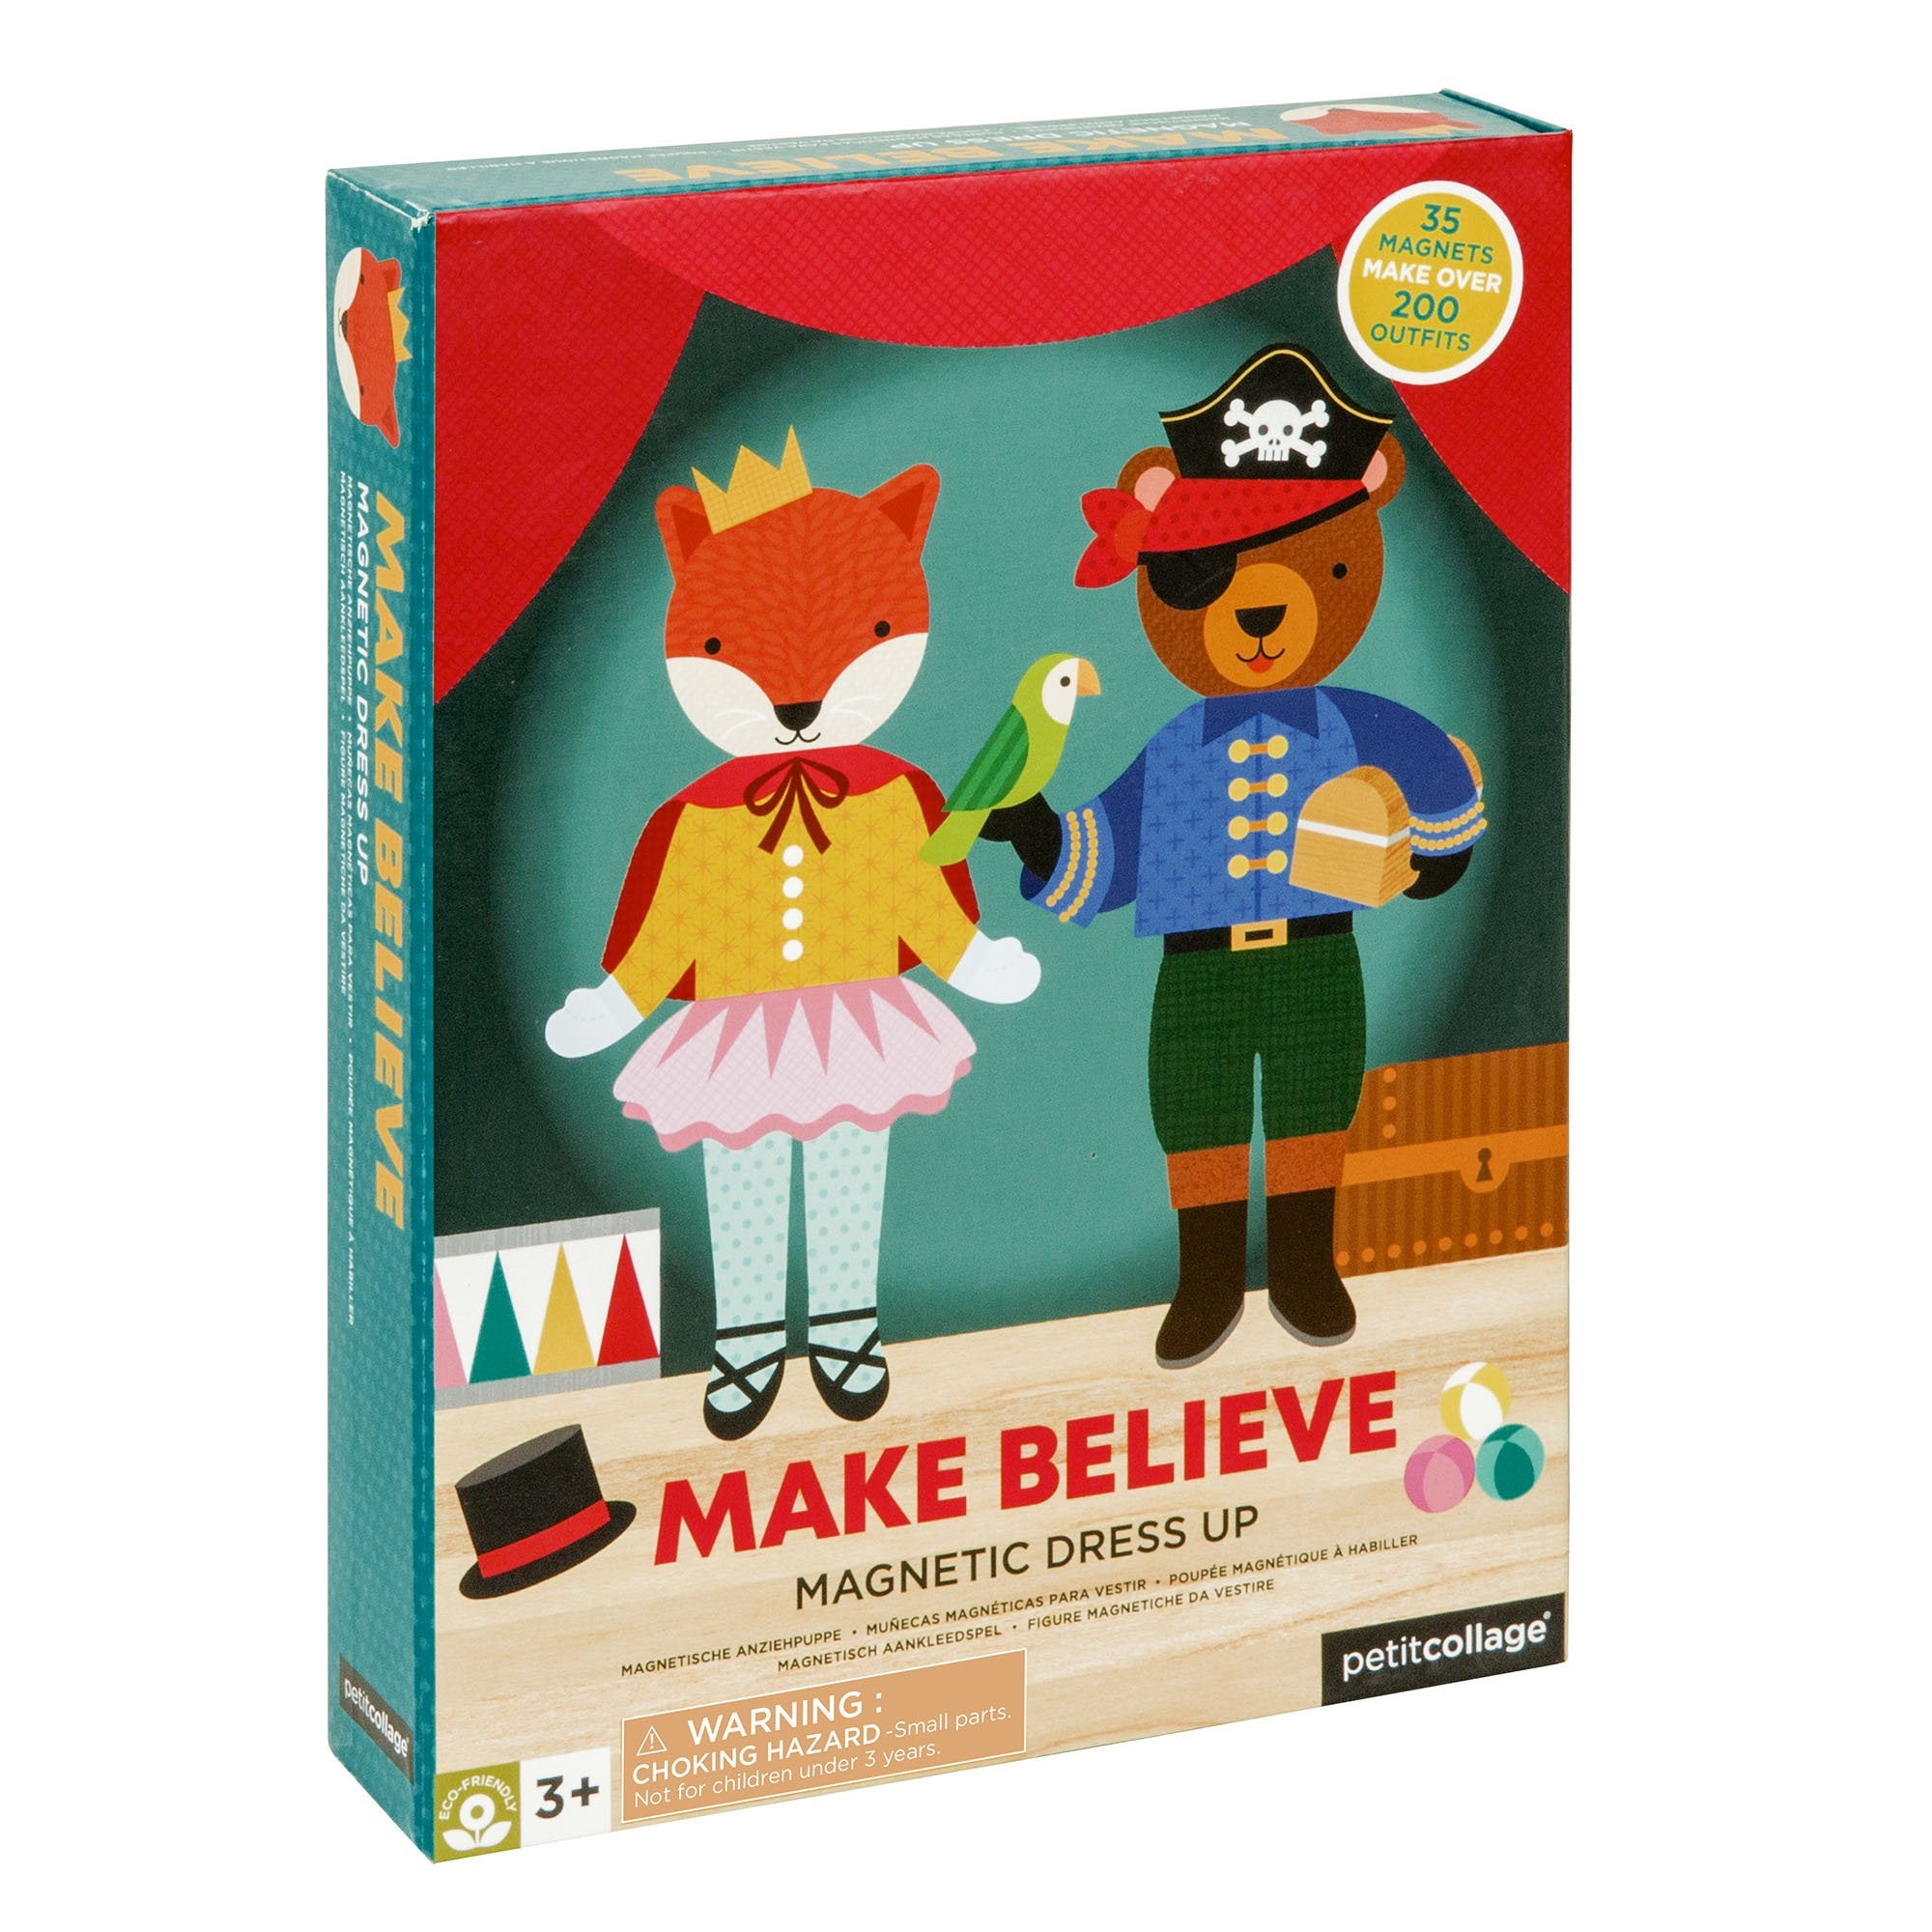 Make Believe Magnetic Play Set